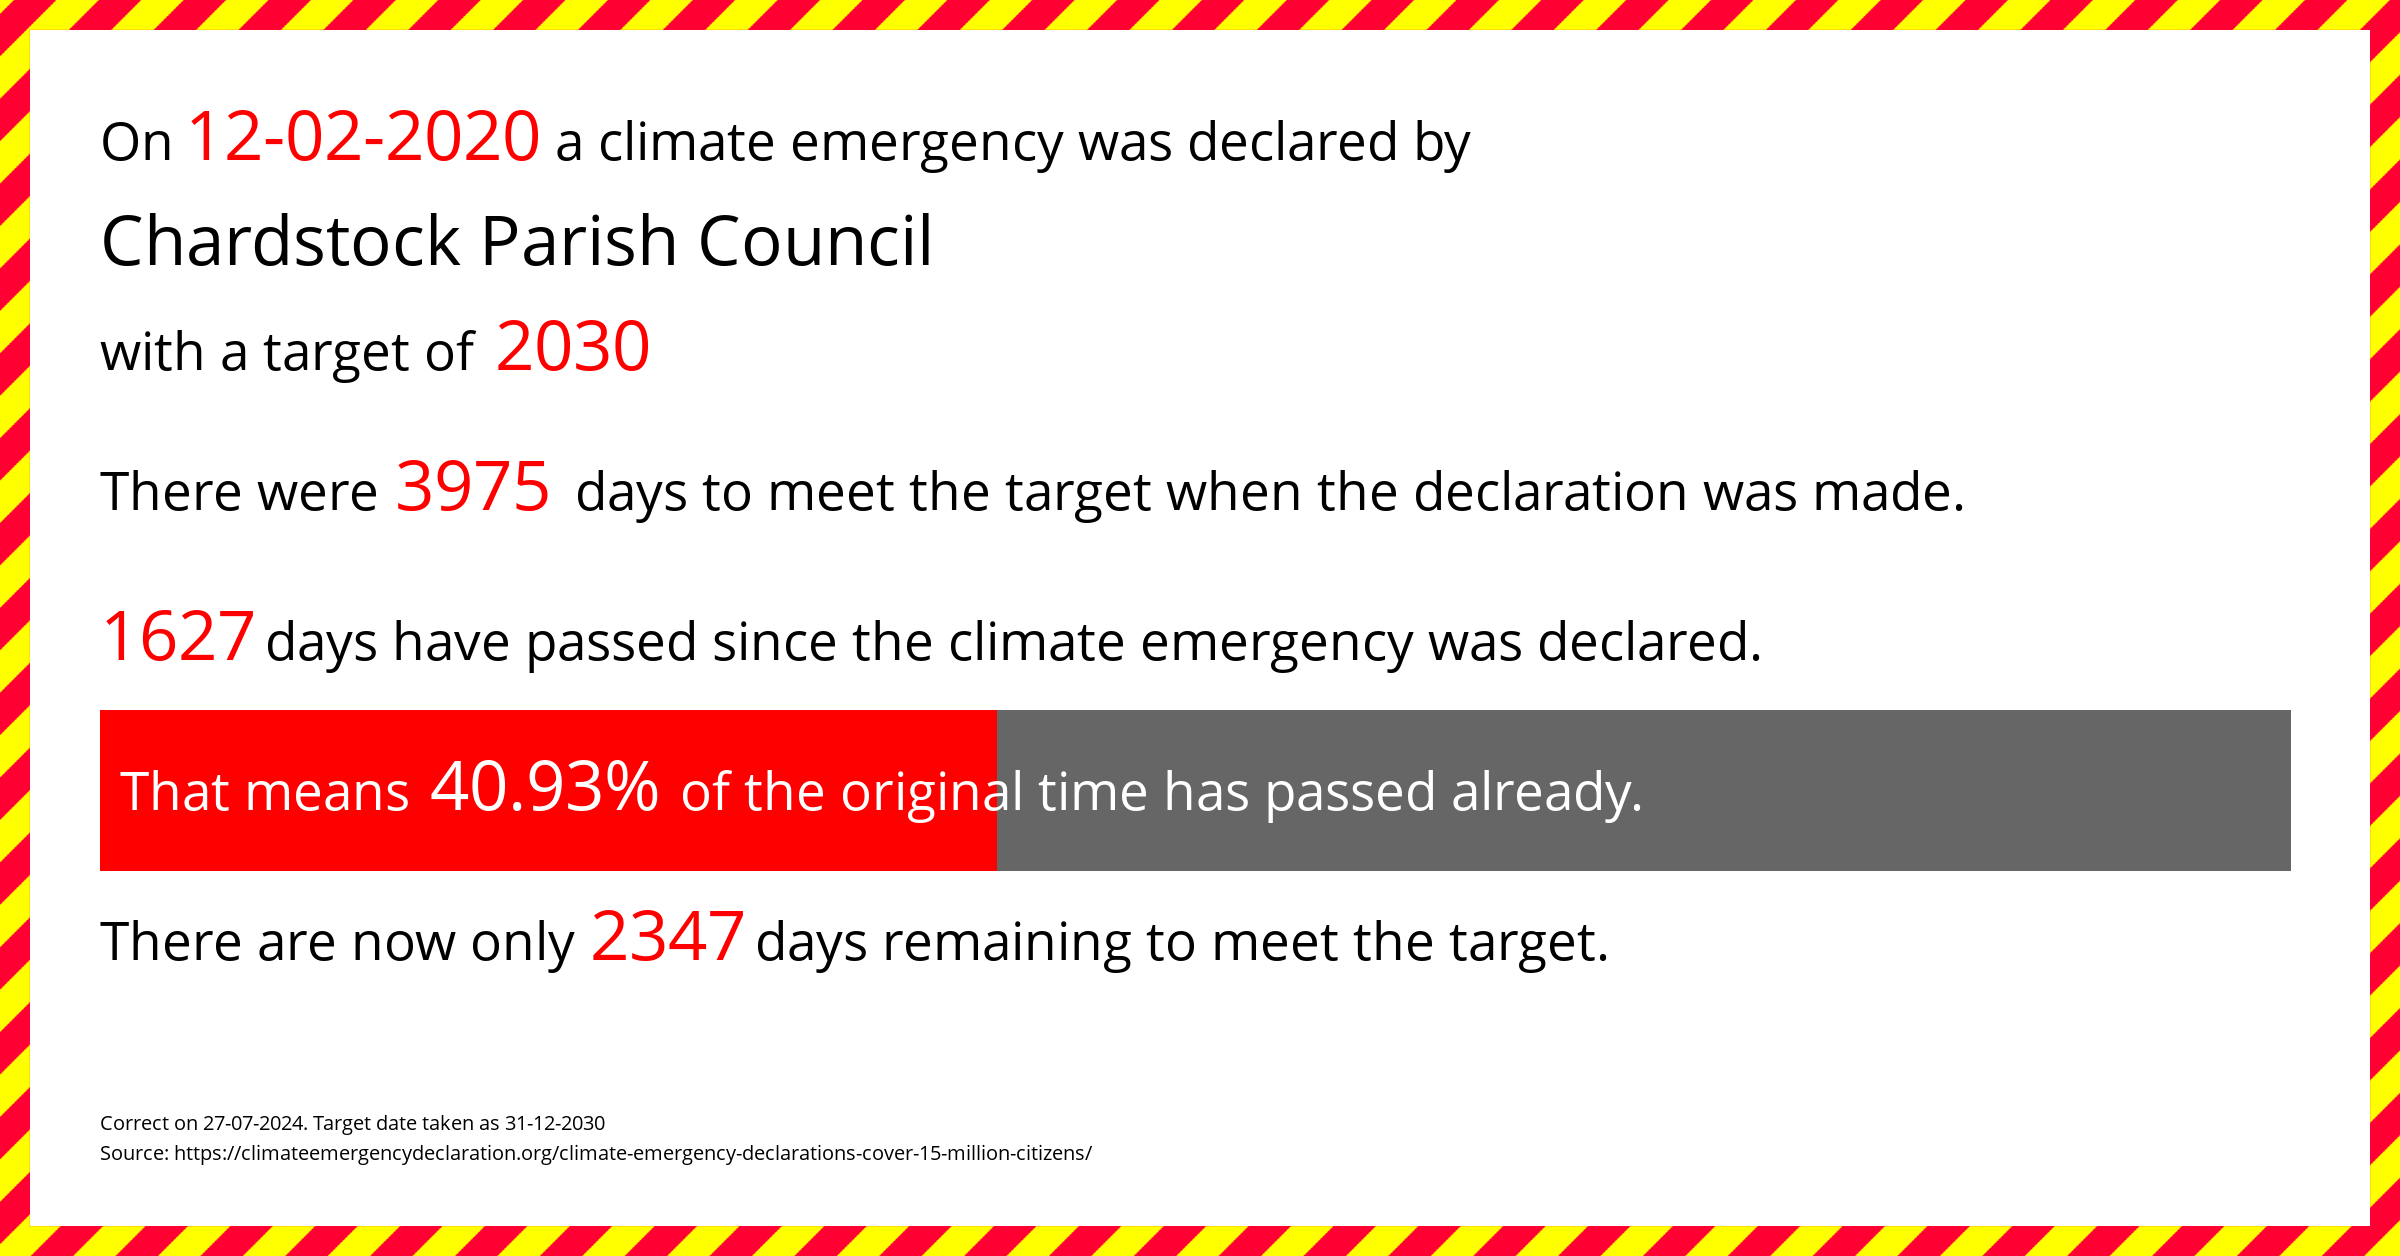 Chardstock Parish Council declared a Climate emergency on Wednesday 12th February 2020, with a target of 2030.